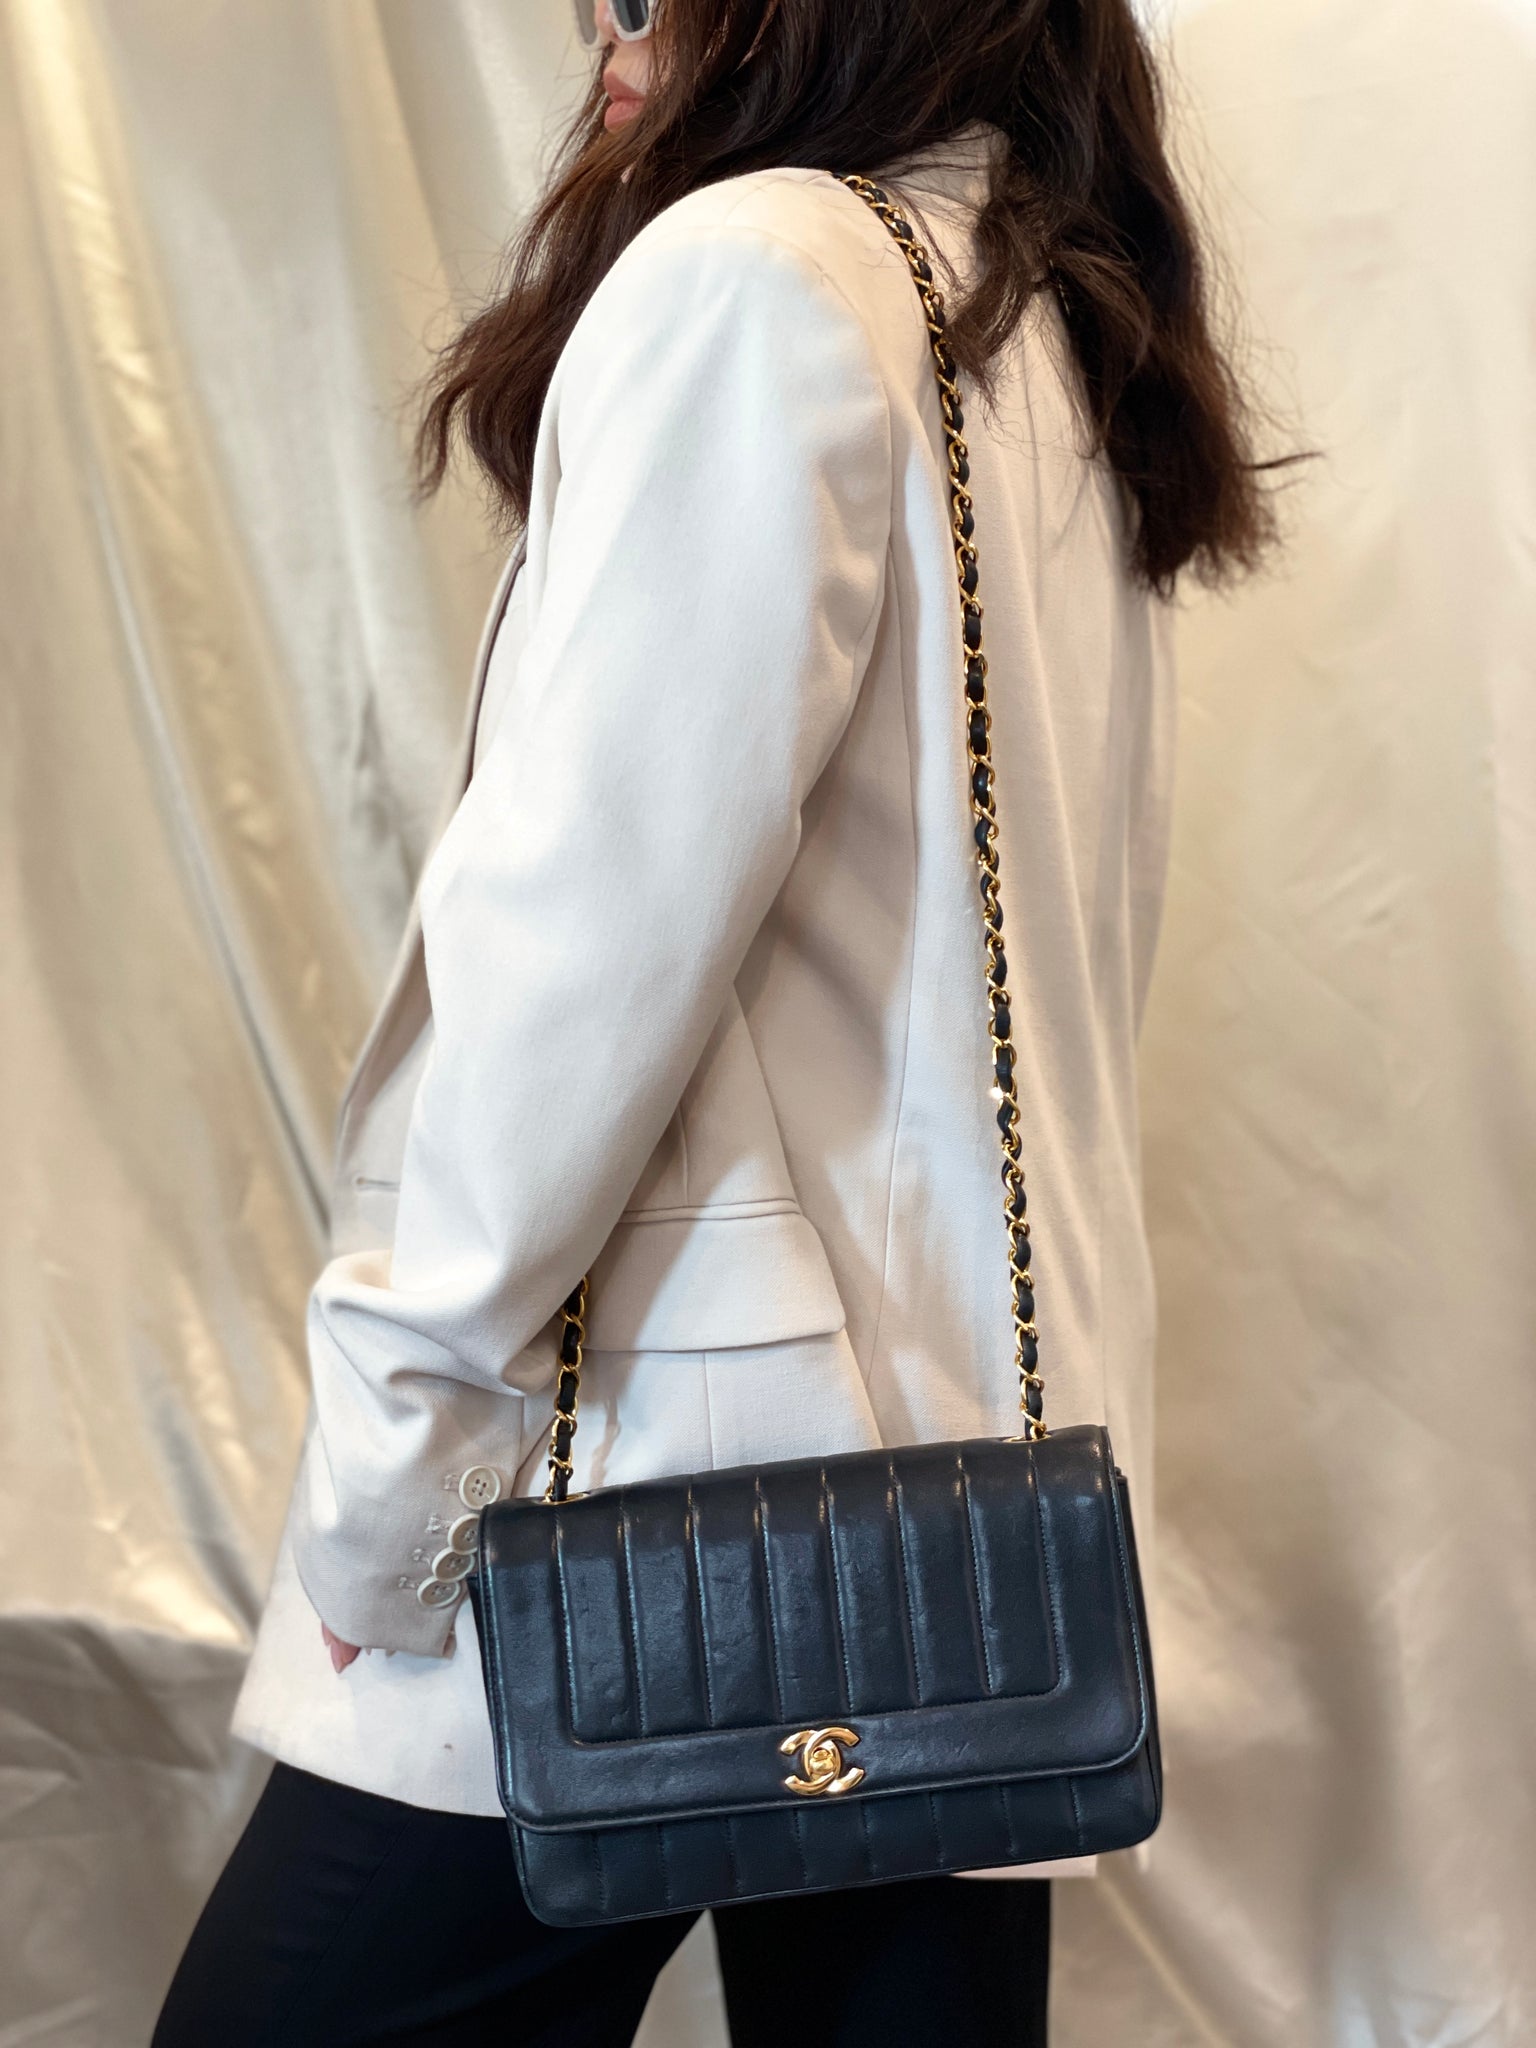 Chanel Vertical Small Flap Bag